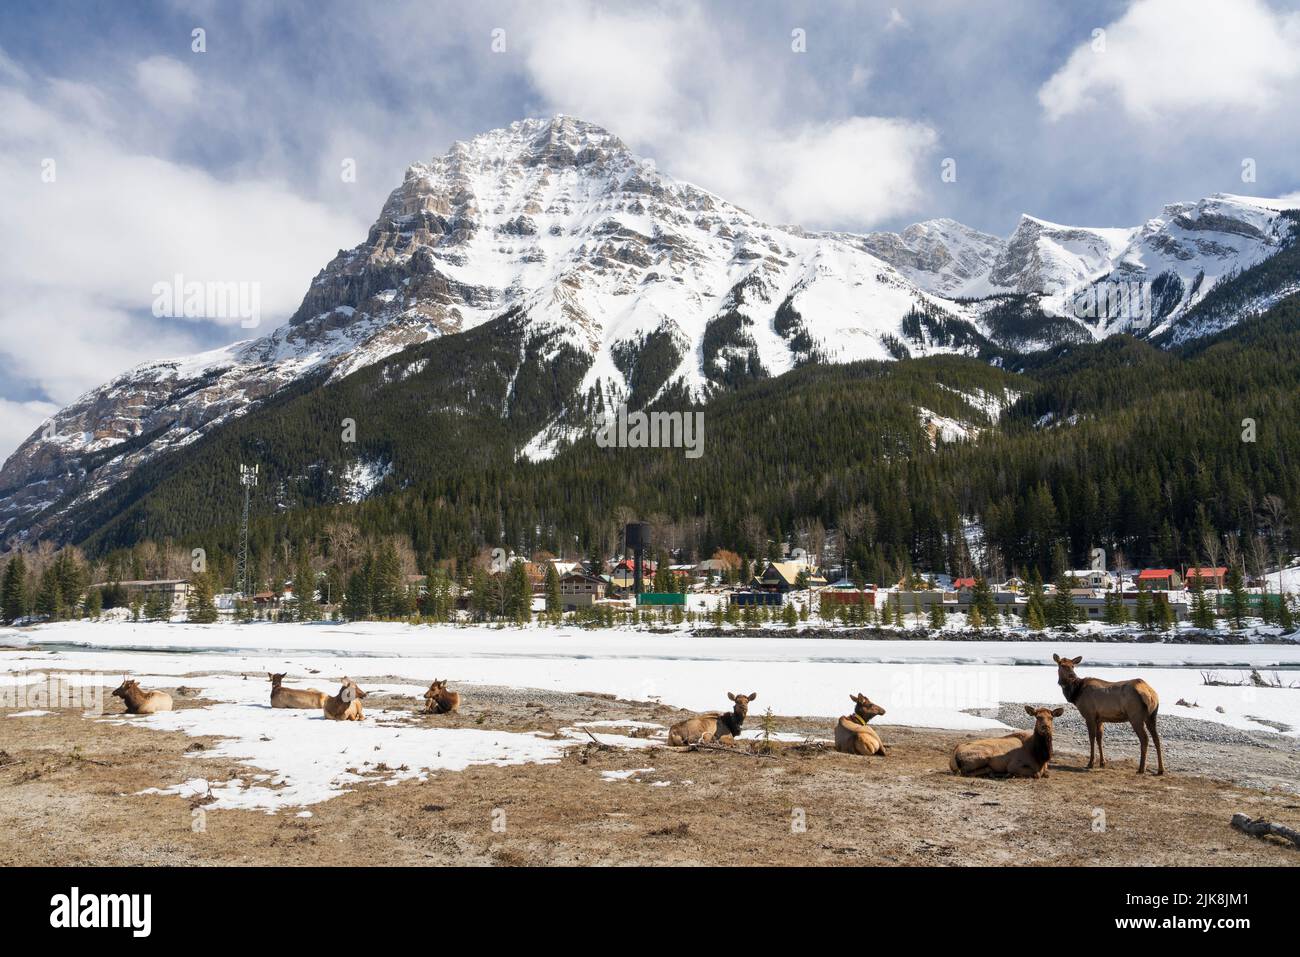 A herd of Elk resting under Mount Stephan near Field, British Columbia, Canada. Stock Photo